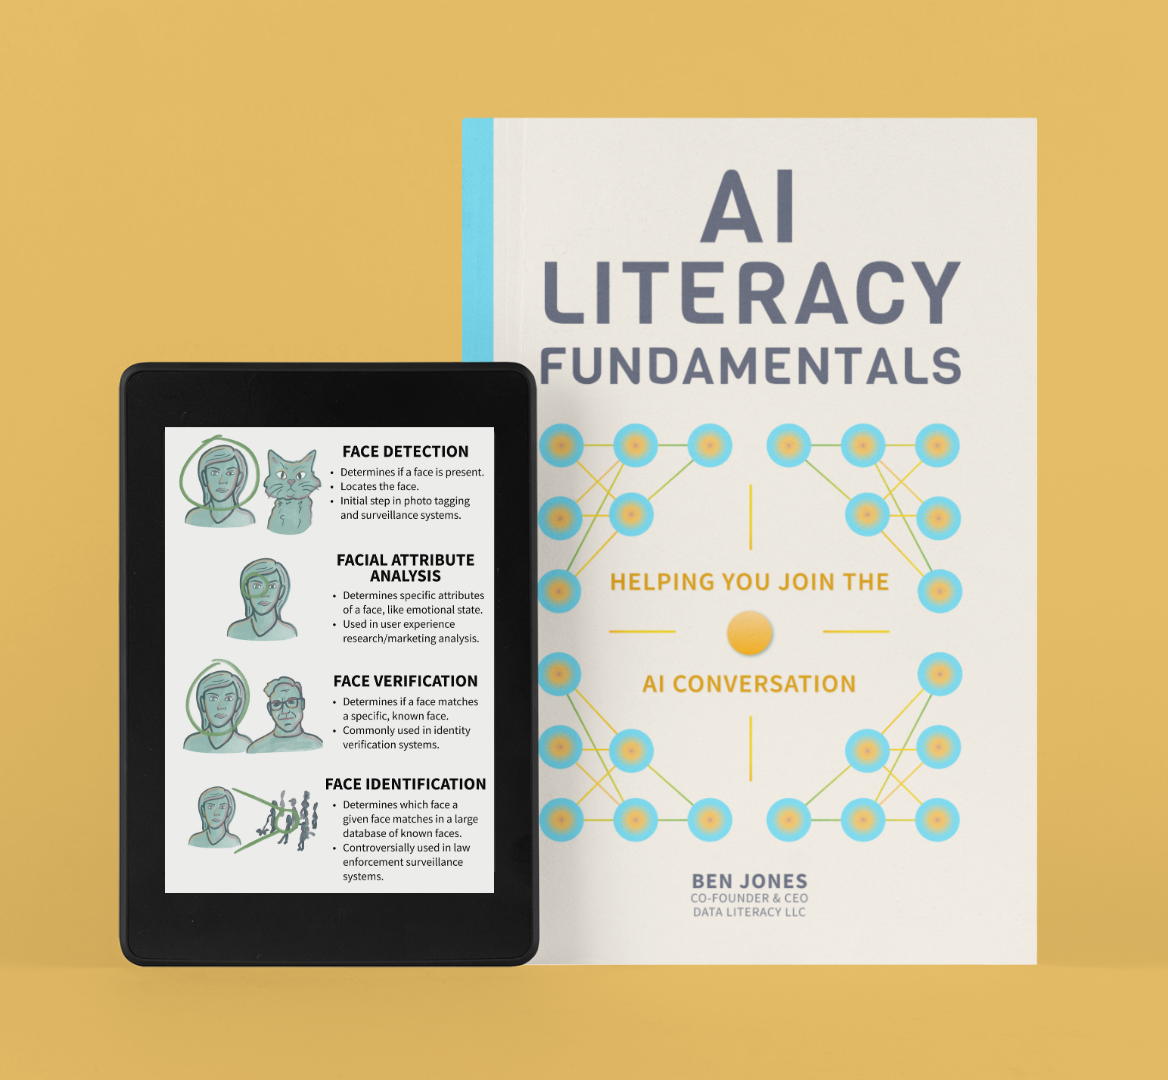 Announcing the Launch of AI Literacy Fundamentals | Data Literacy | Data Literacy  